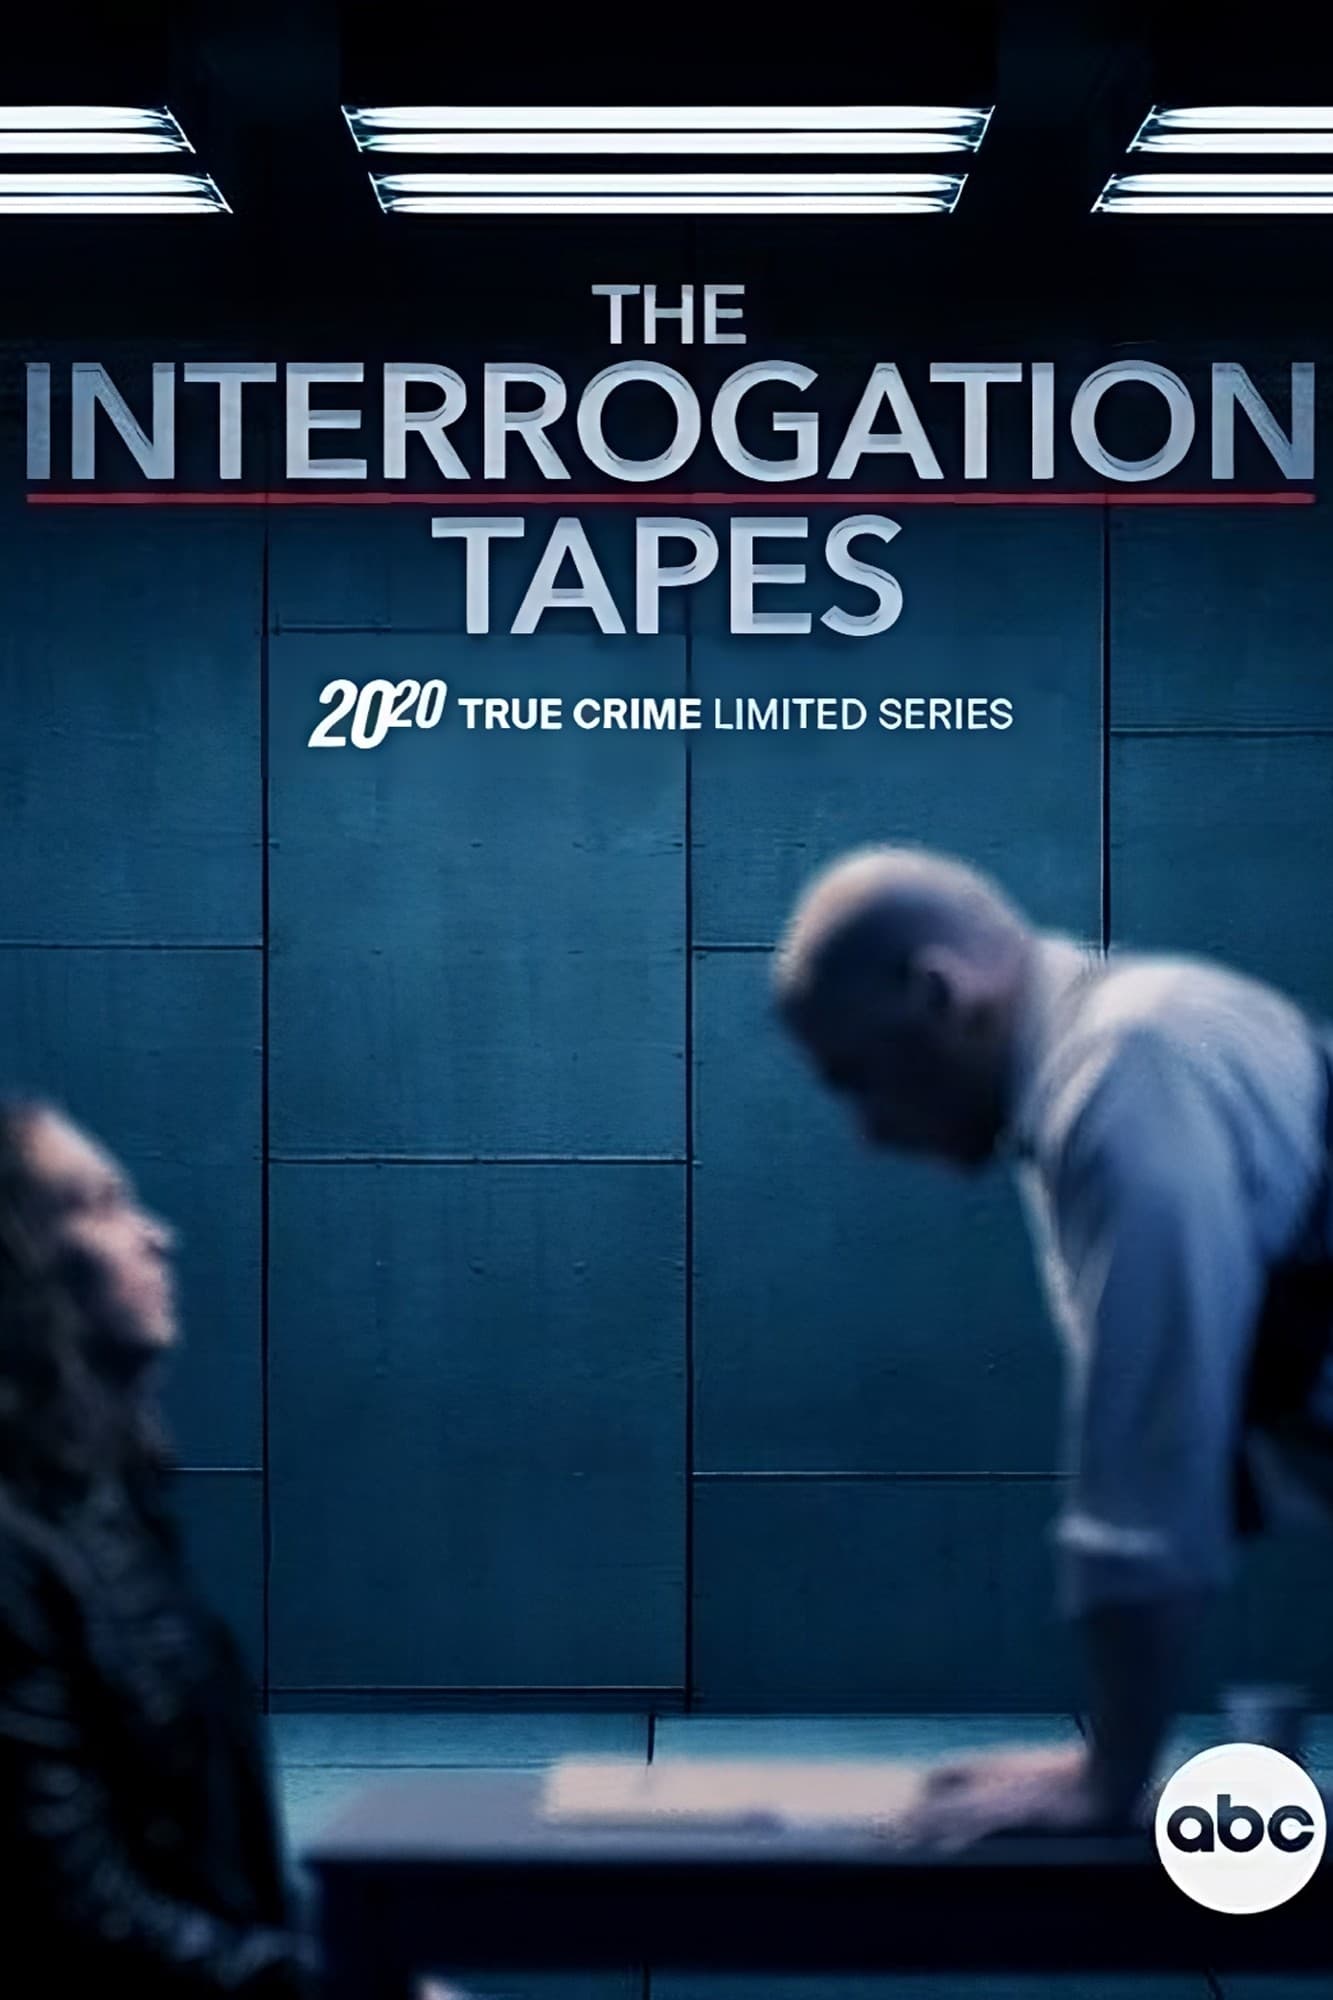 The Interrogation Tapes: A Special Edition of 20/20